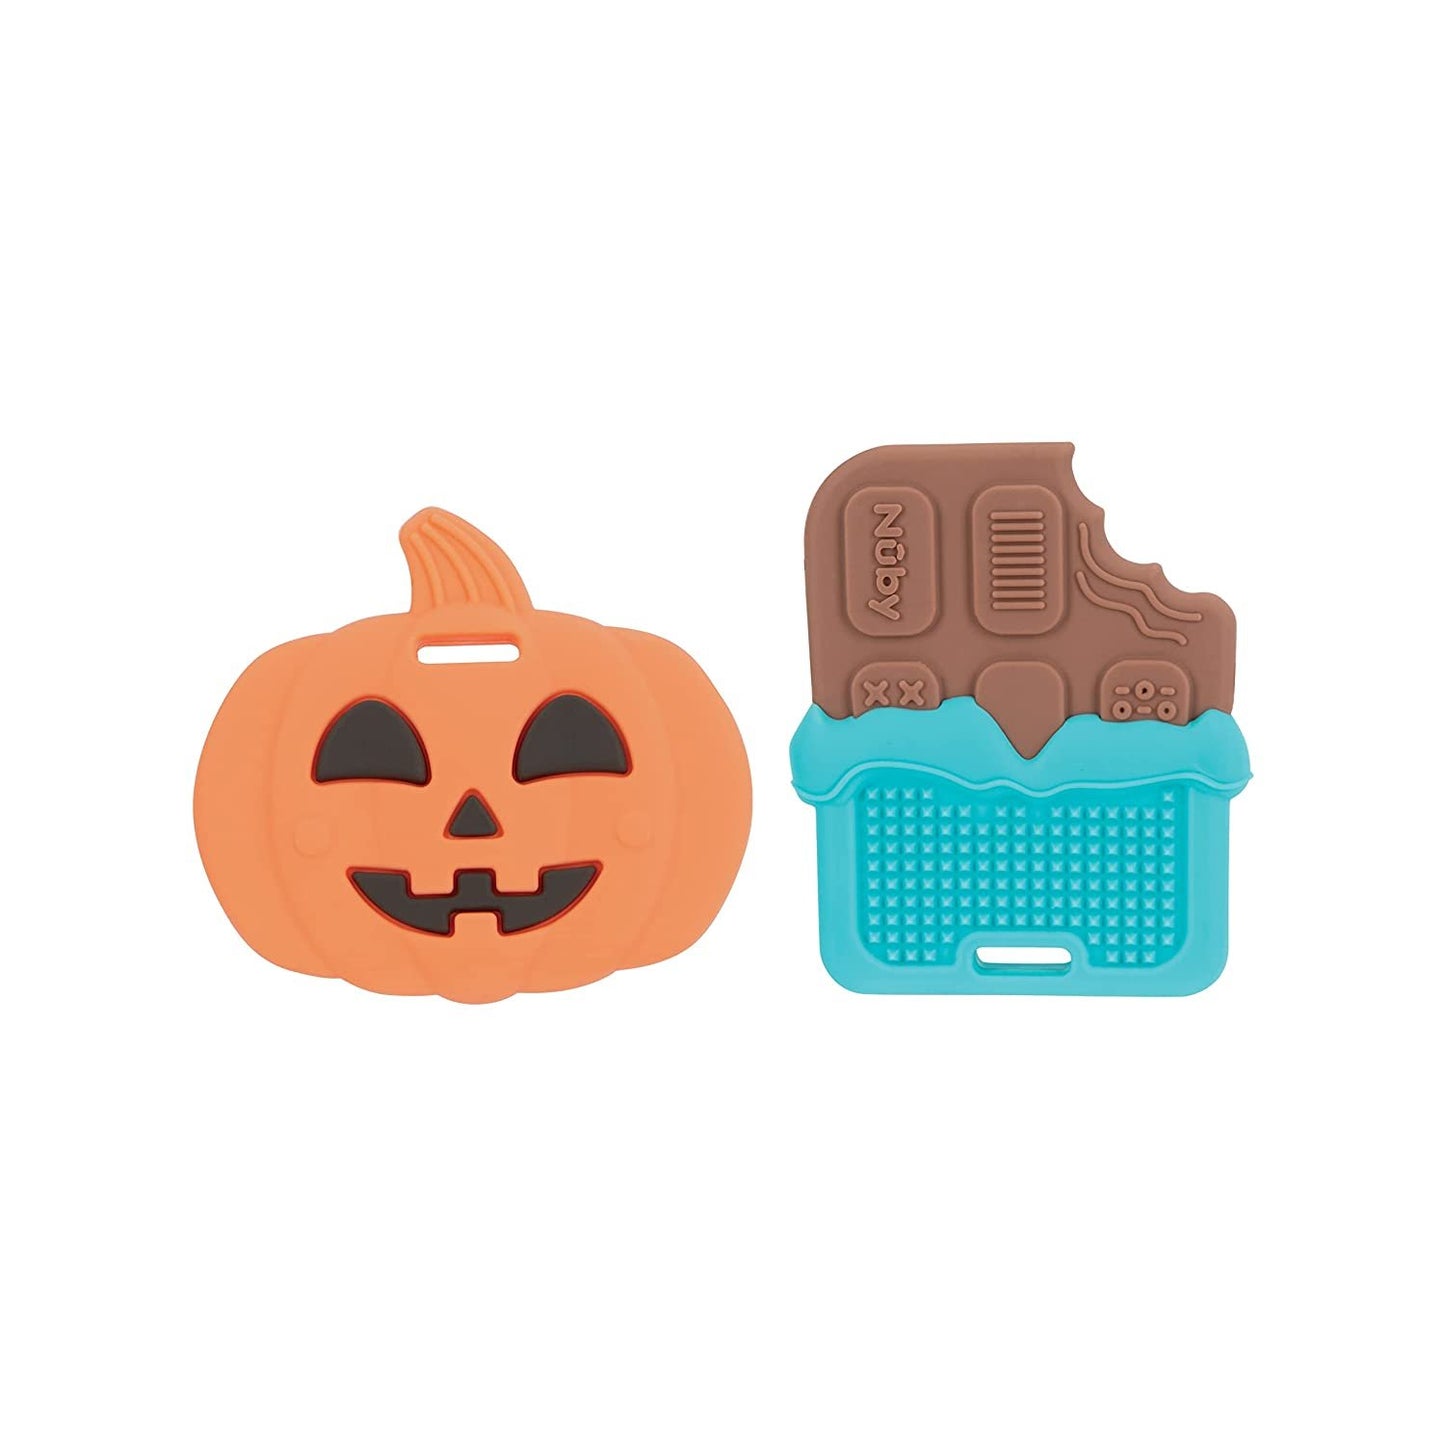 Nuby All Silicone Pumpkin & Chocolate Bar Teether – 2 Pack, 3+ Months